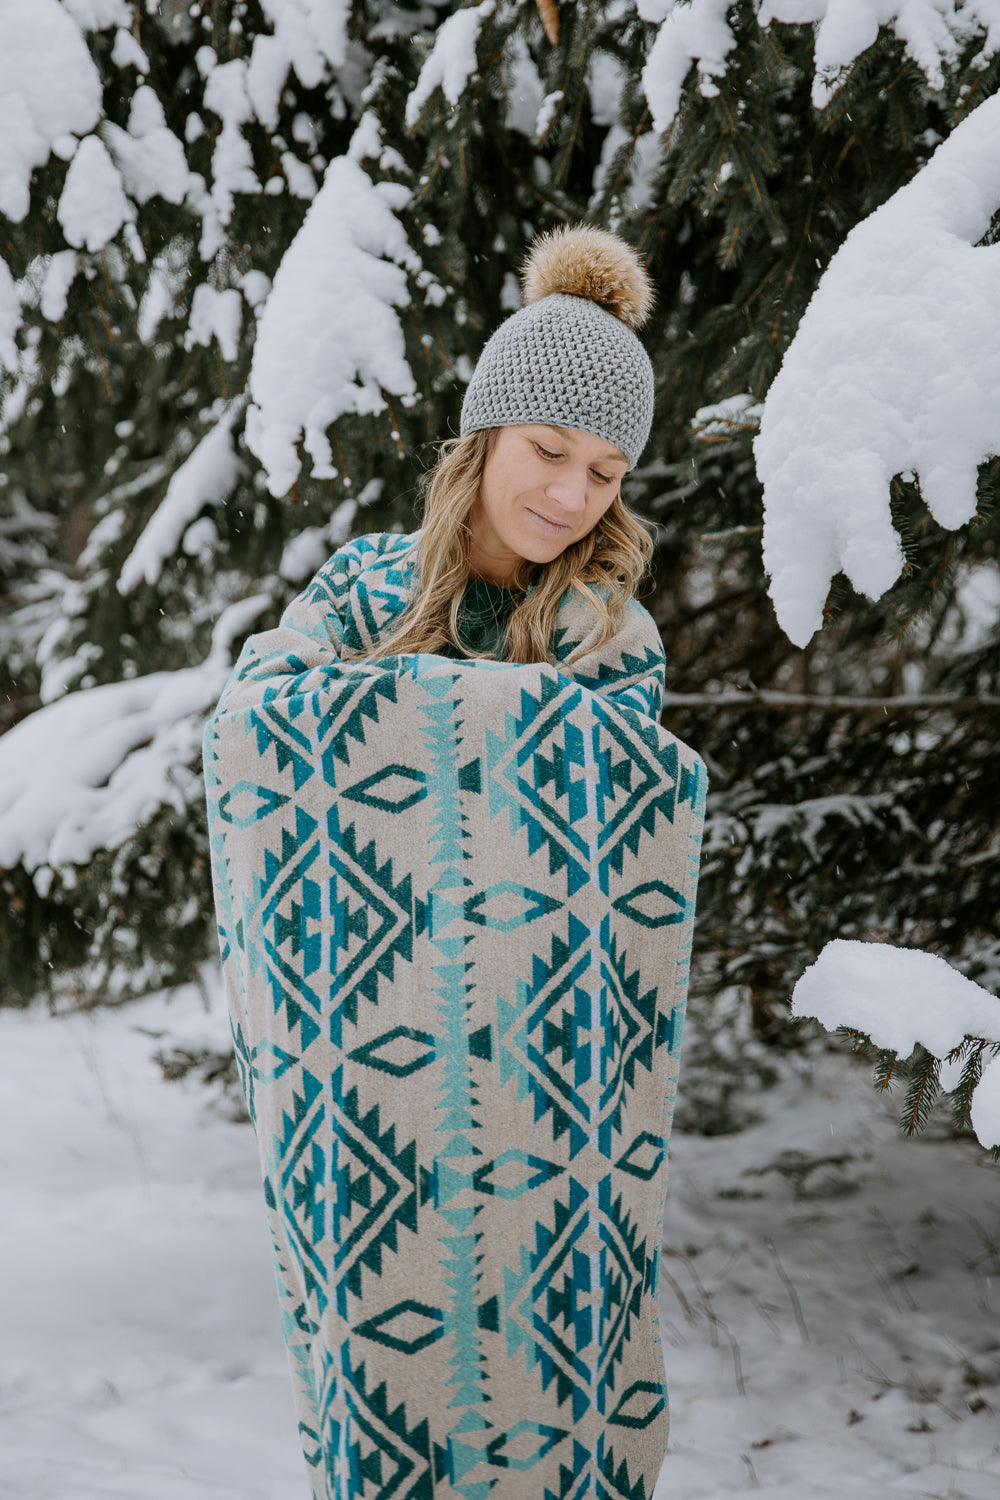 Geometric Throw blanket for decoration or outdoor activity